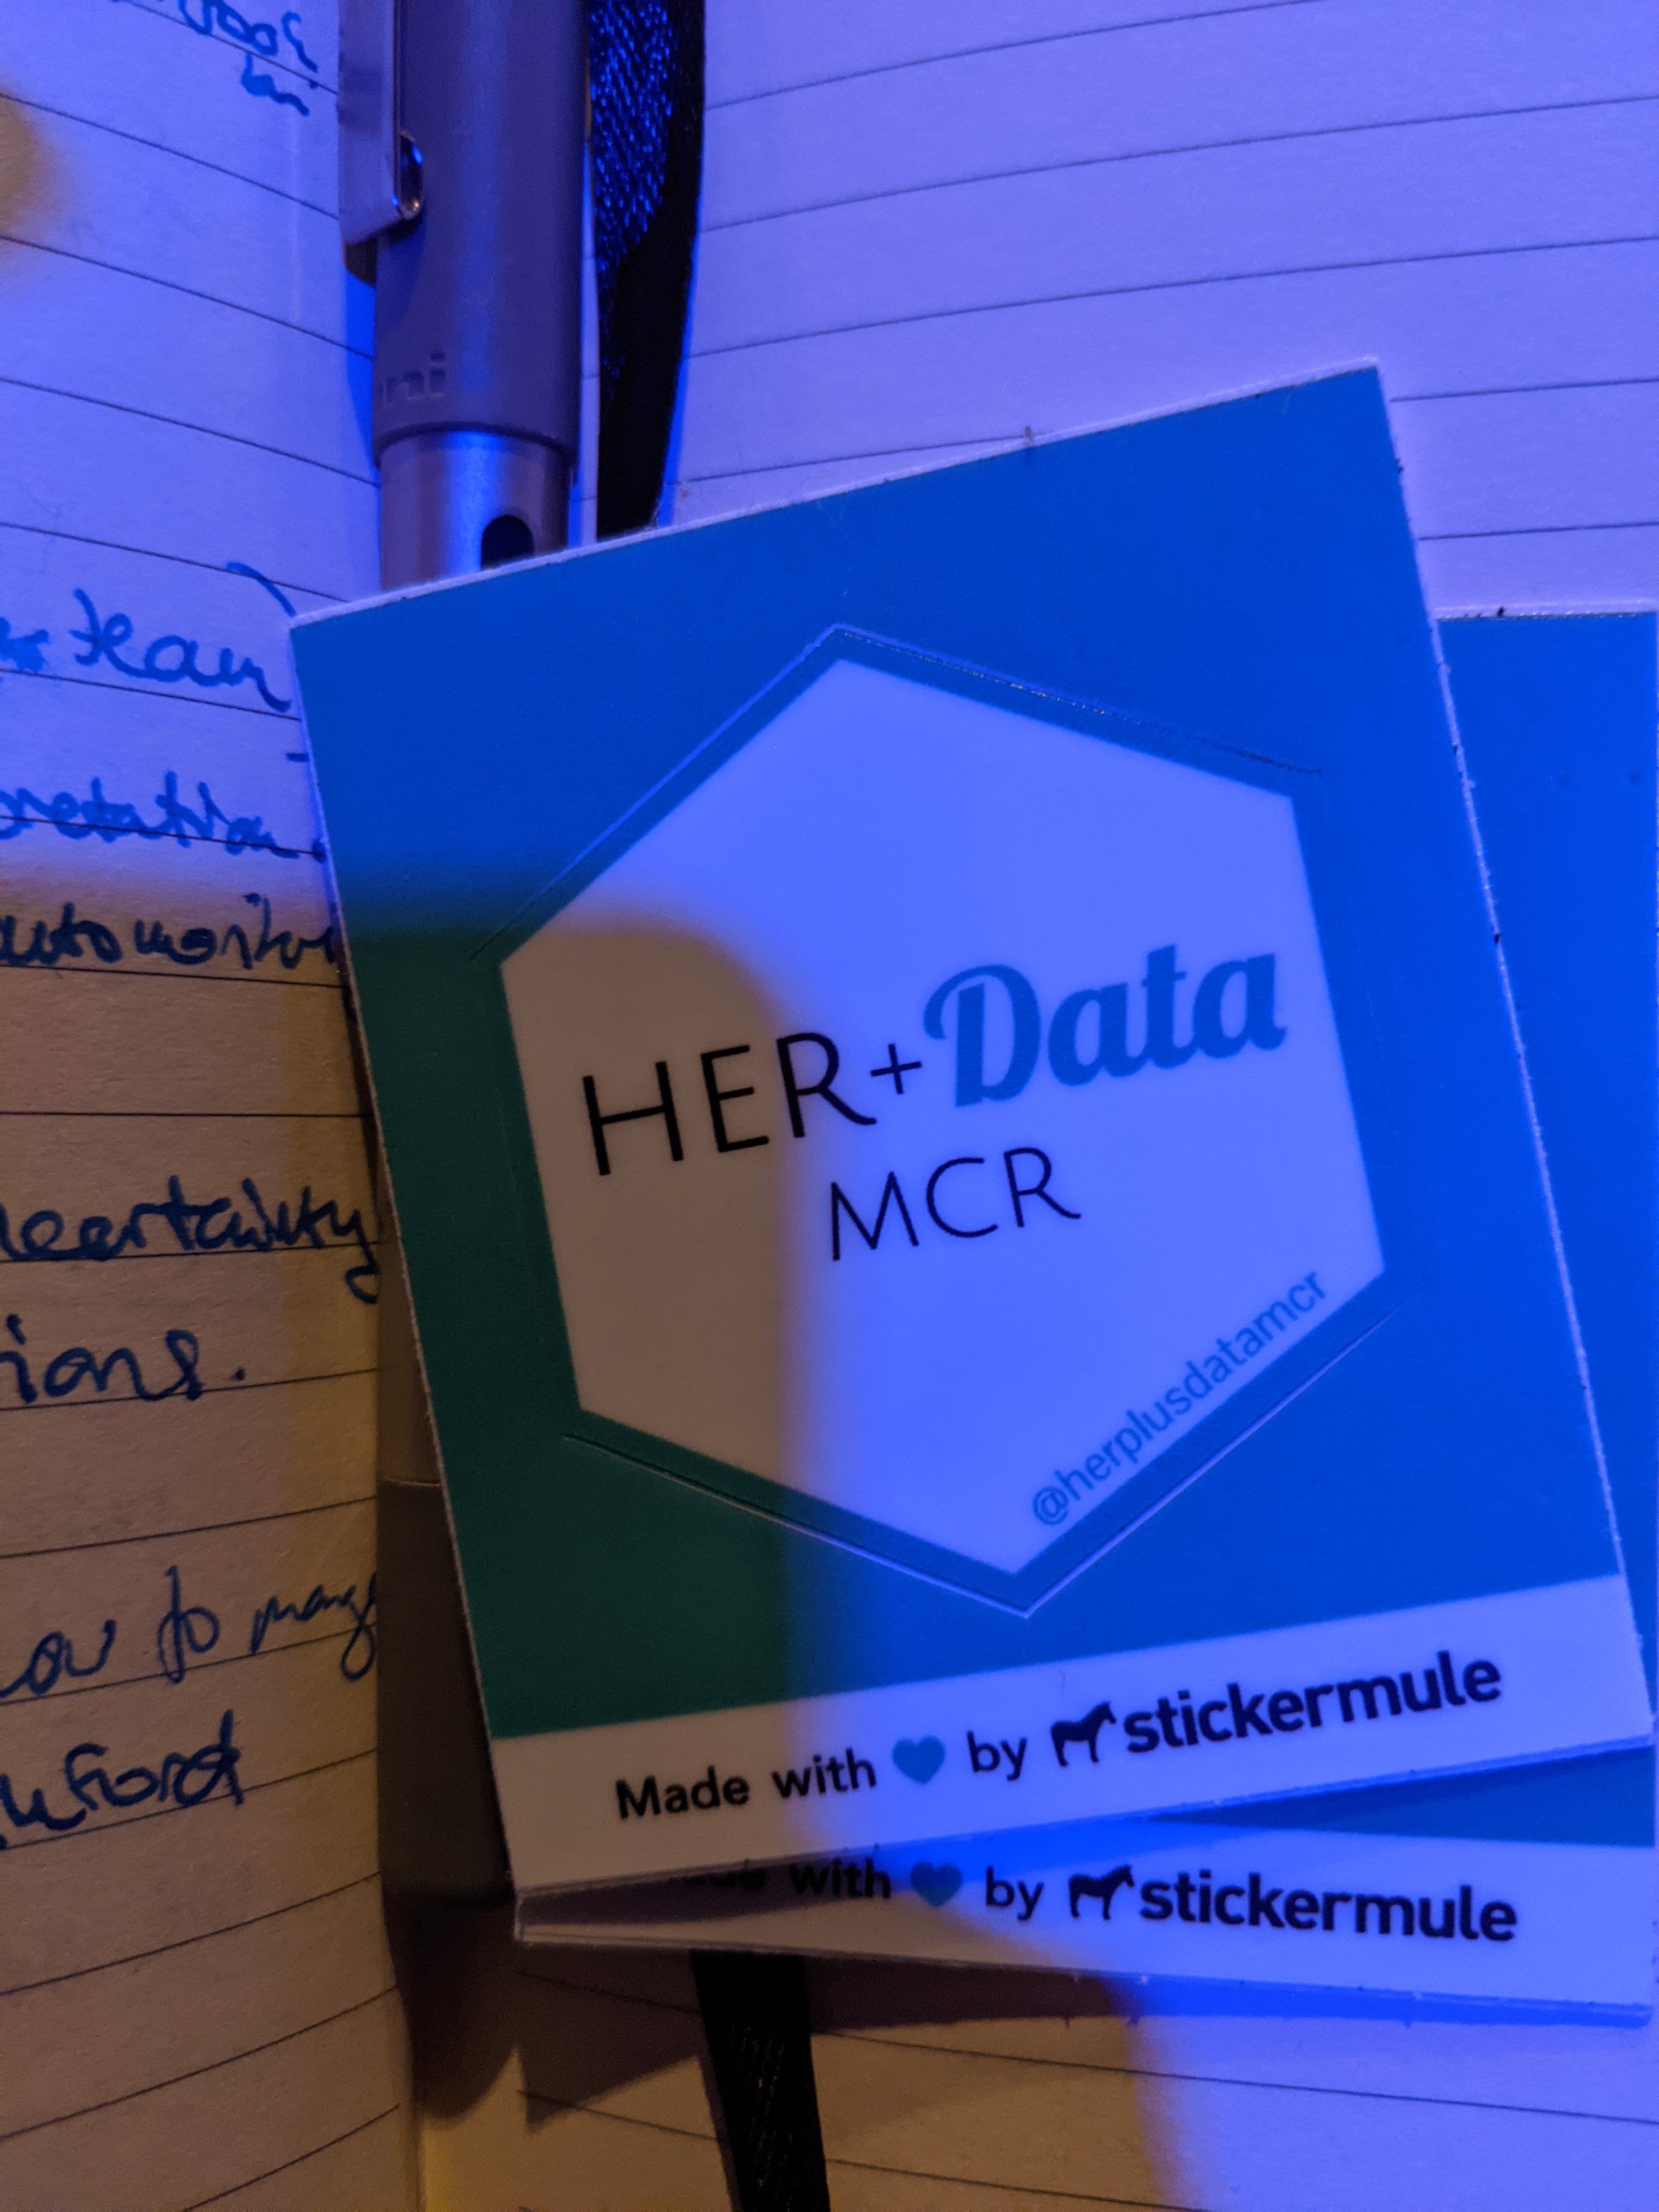 Her+Data stickers